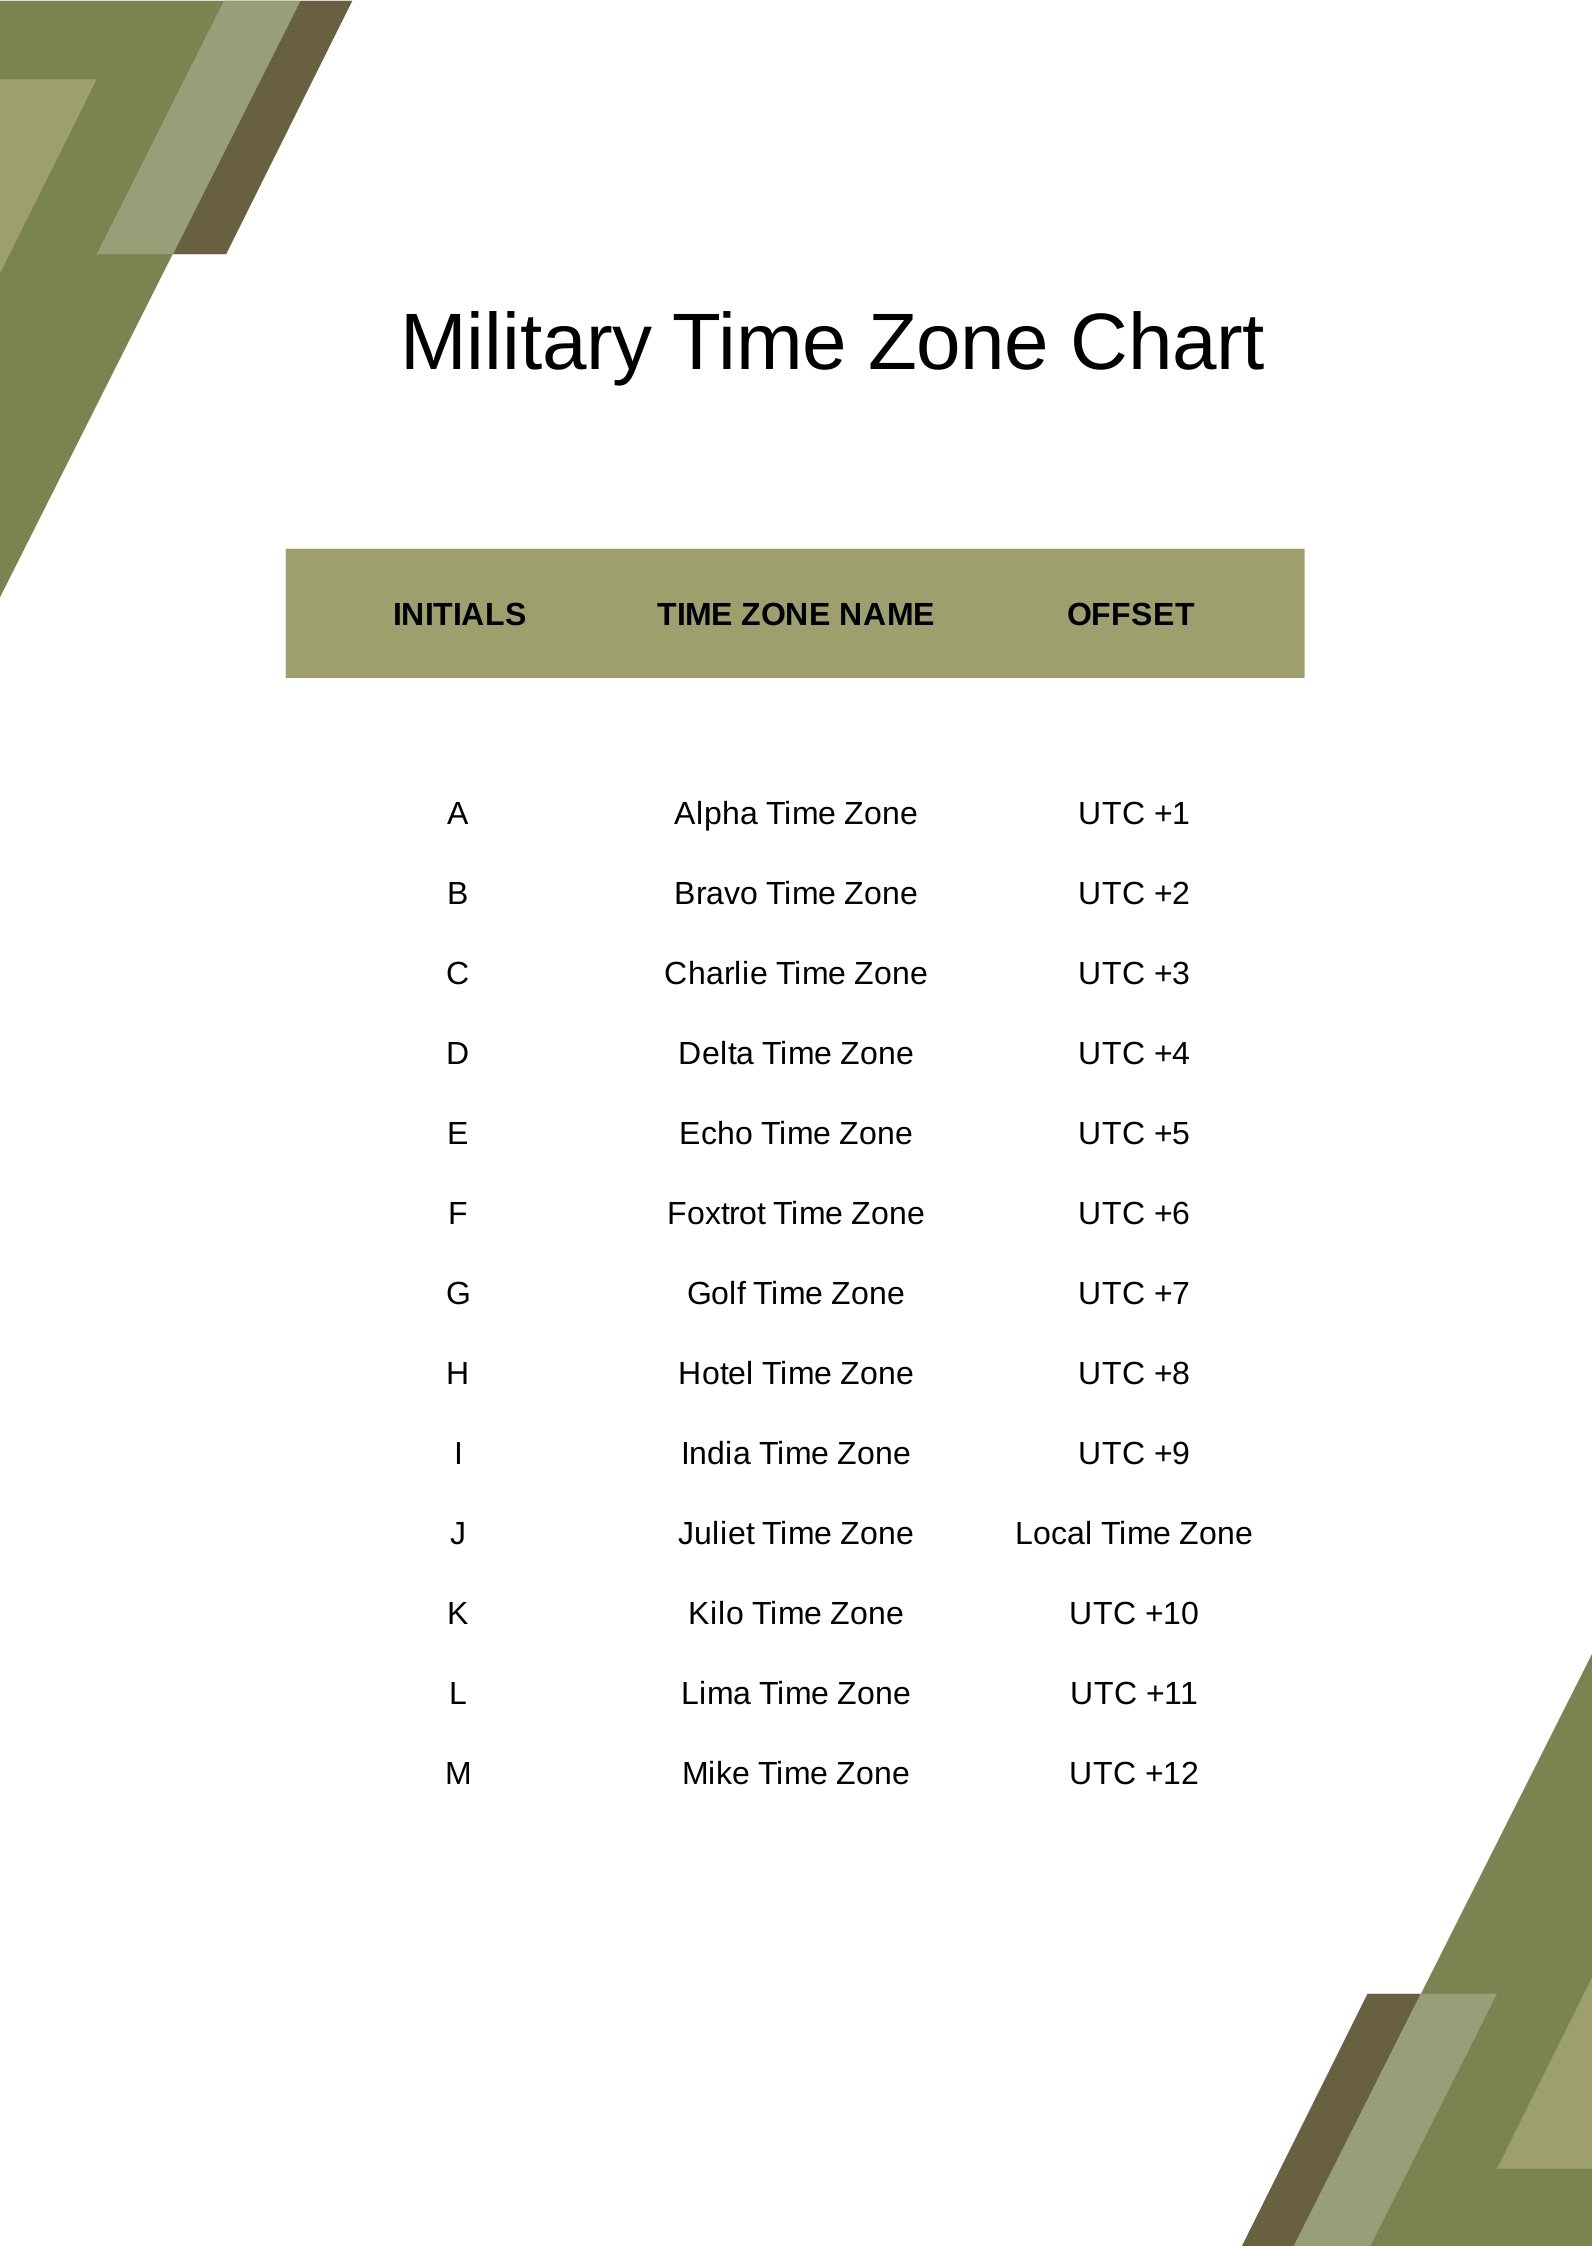 Military Time Zone Chart Template